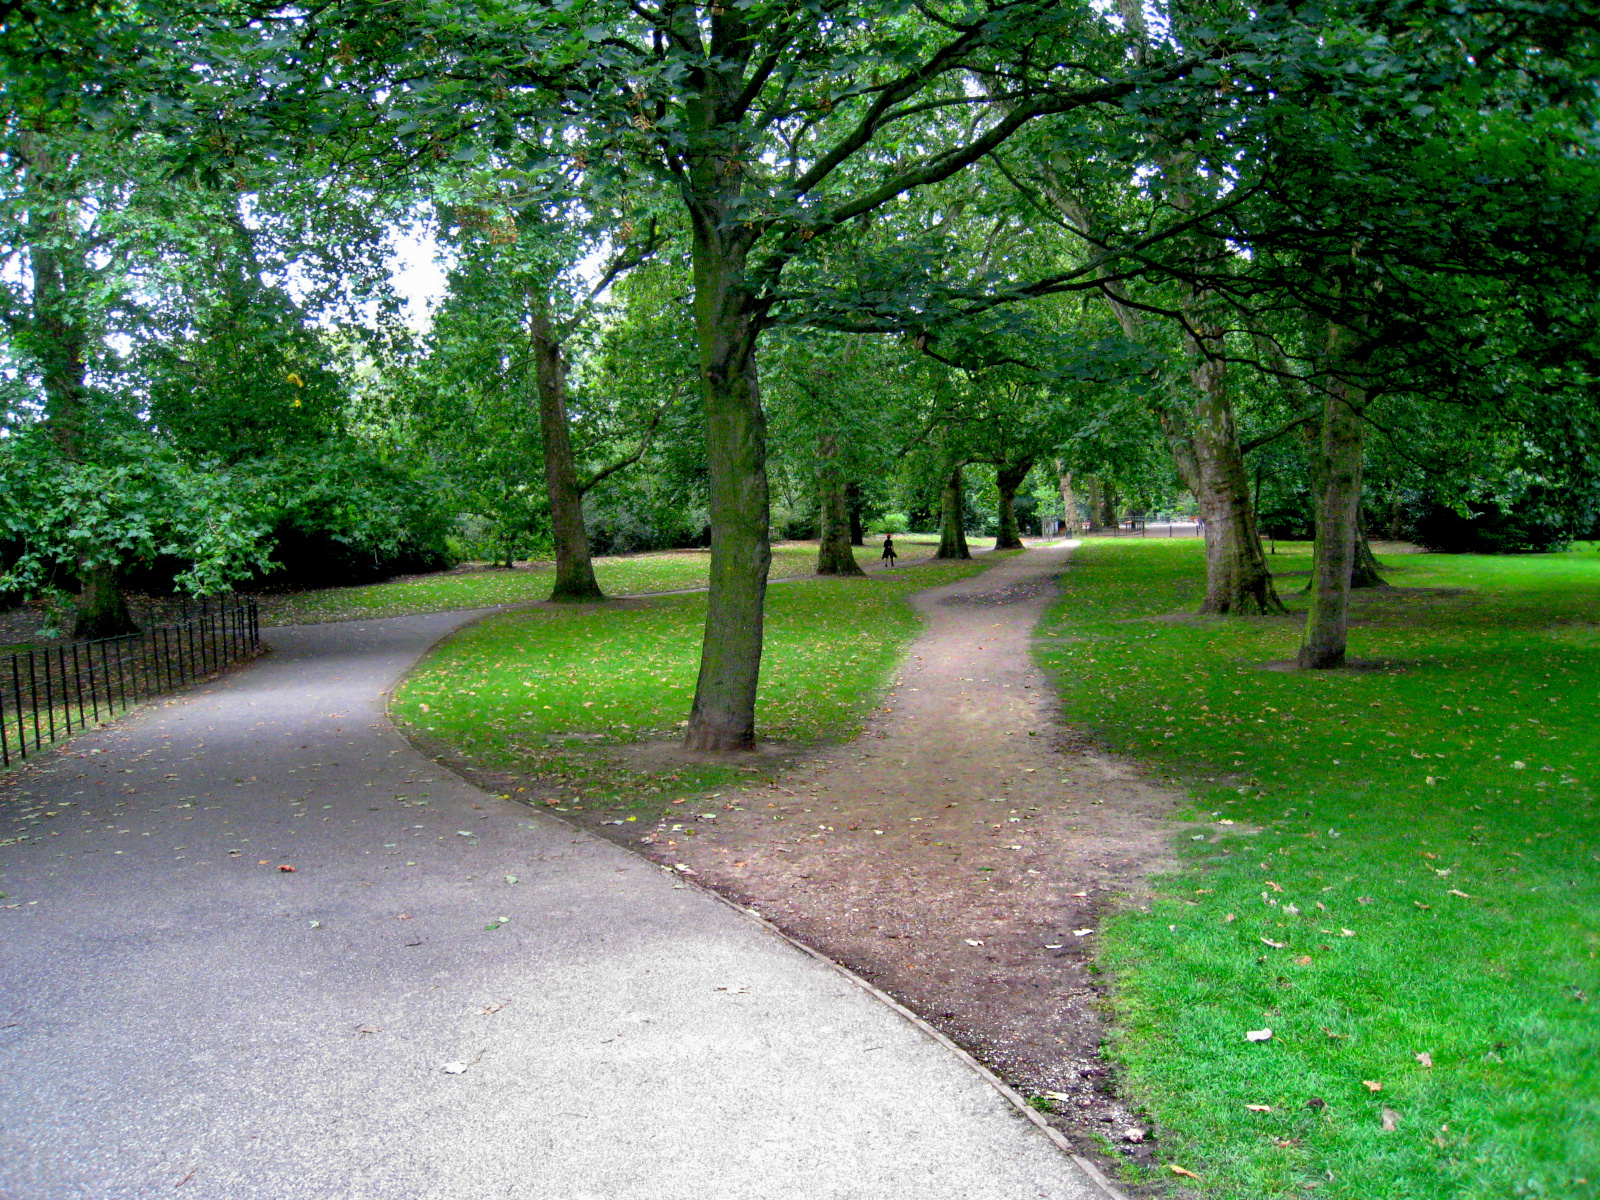 A paved path diverges from a 'desire path' — an area of grass worn from use